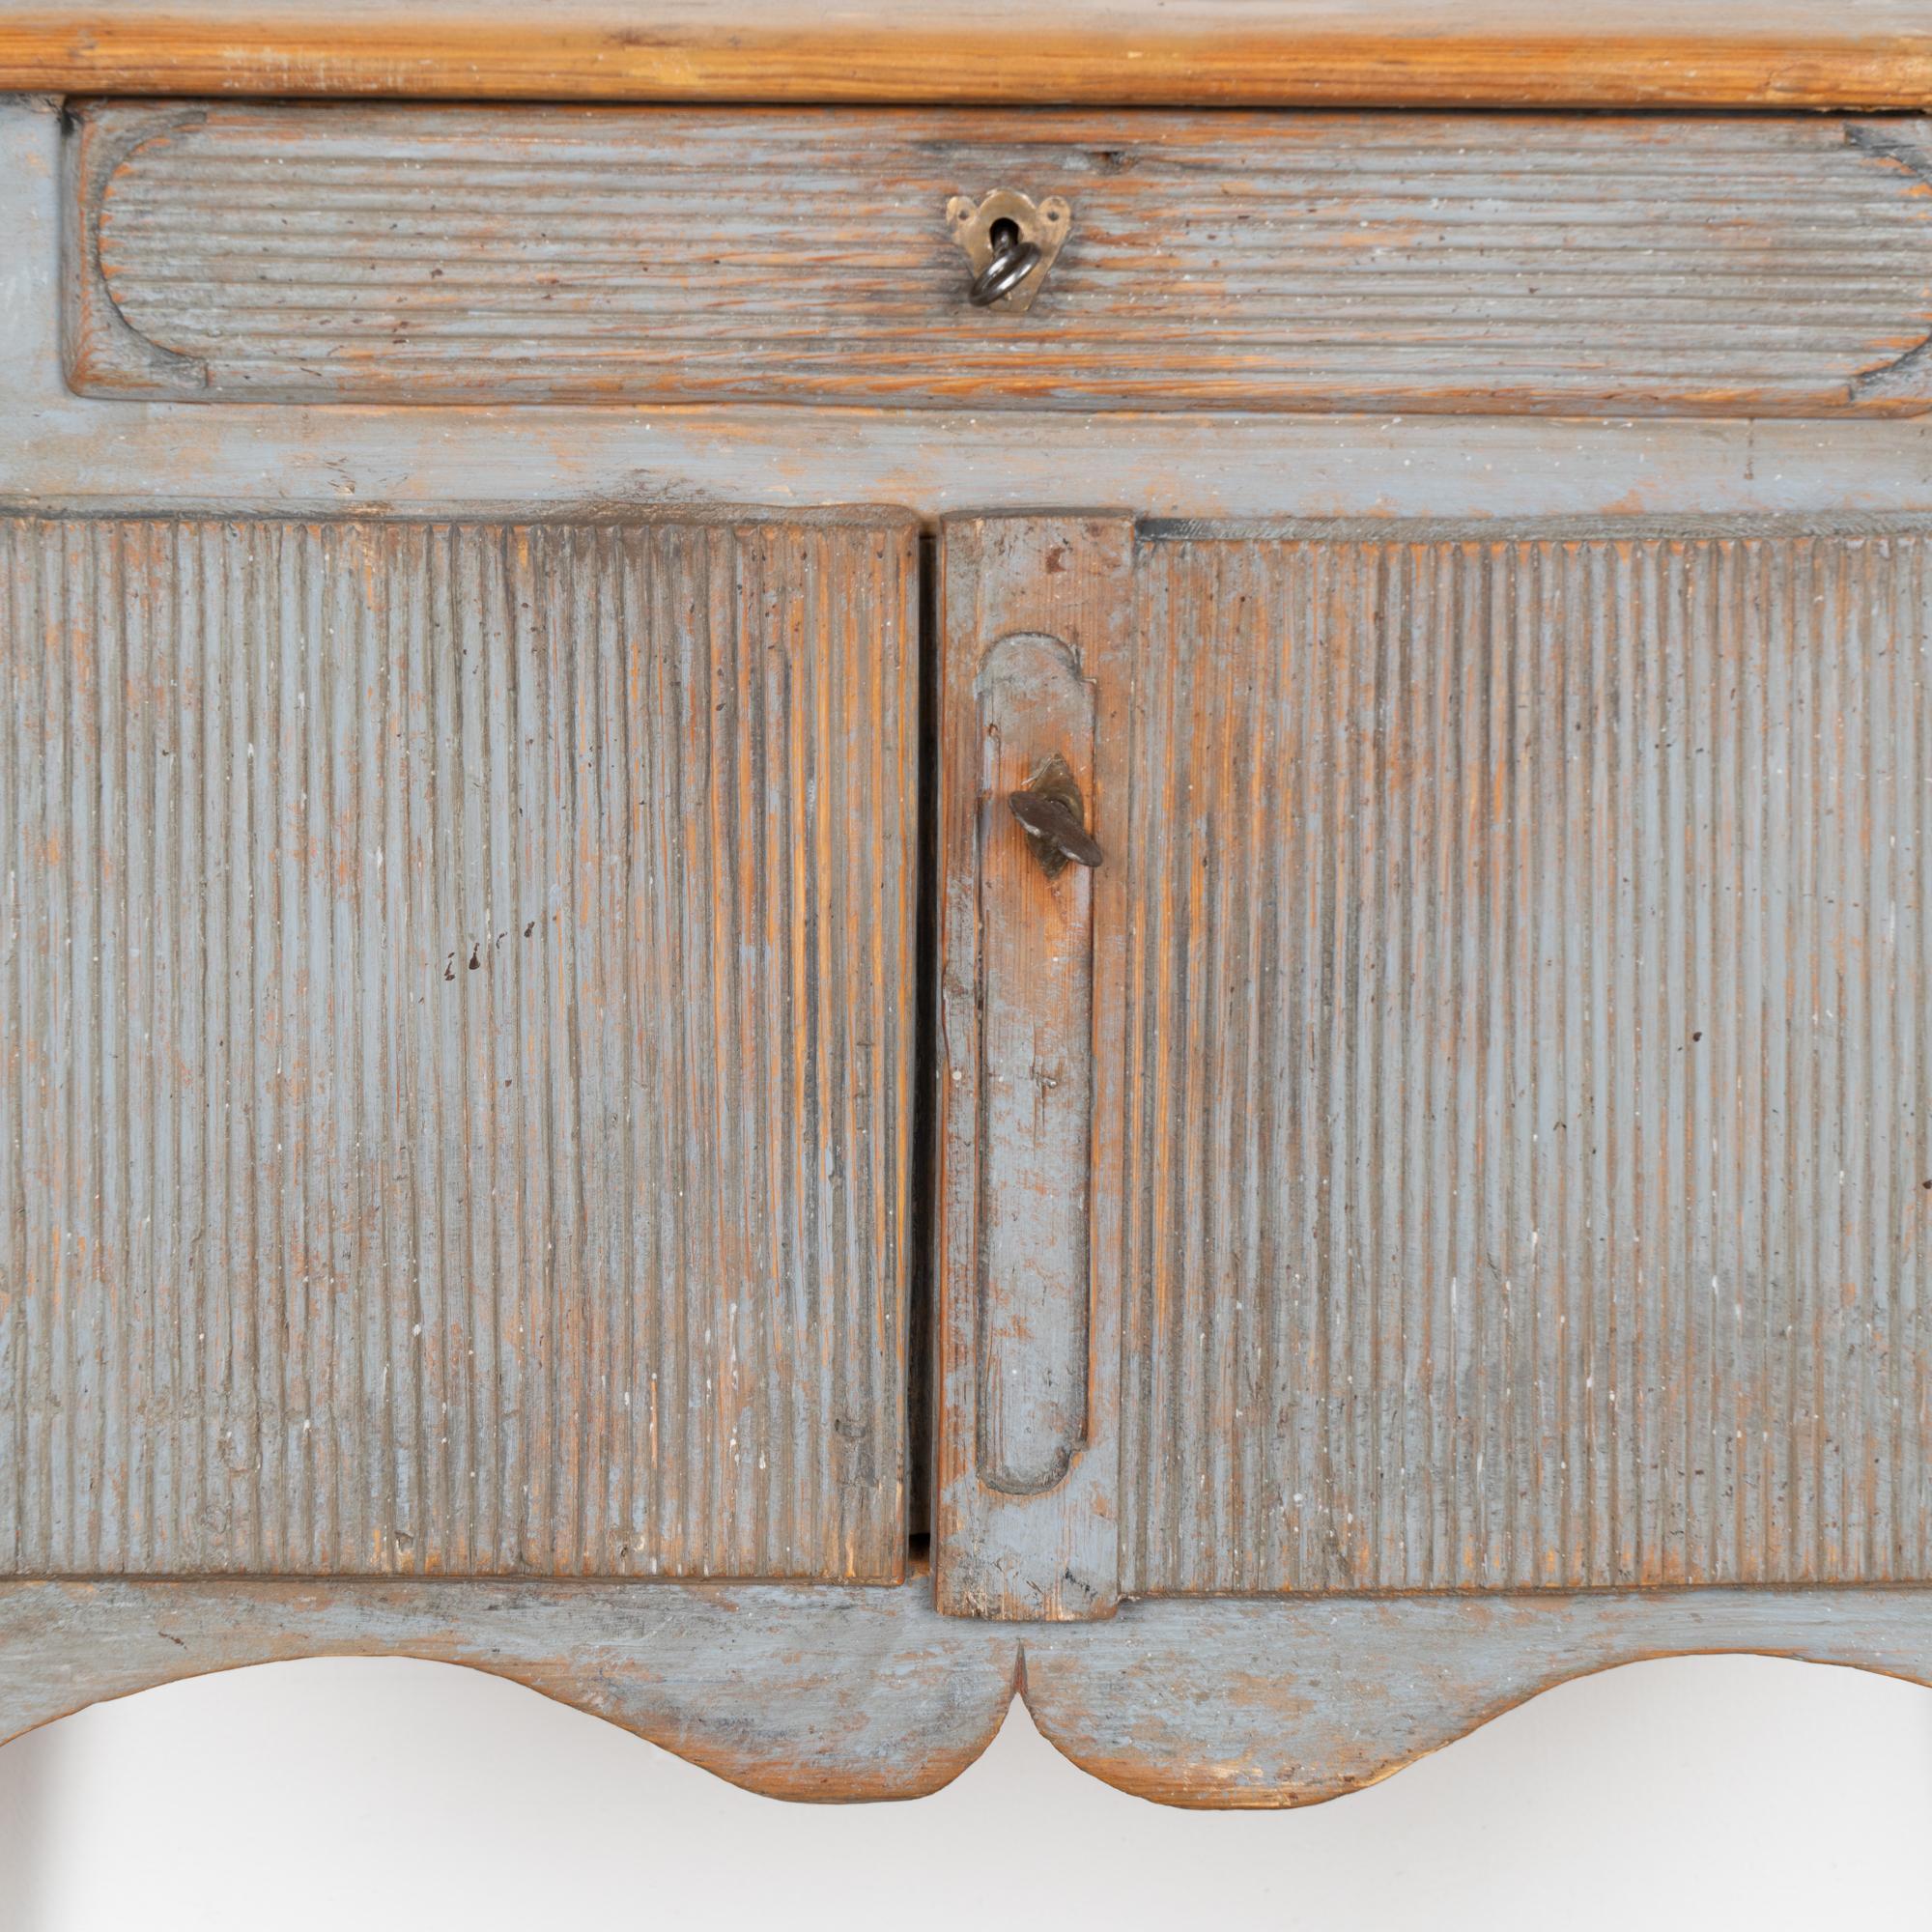 Original Blue Painted Small Cabinet or Nightstand, Sweden circa 1860-80 For Sale 1